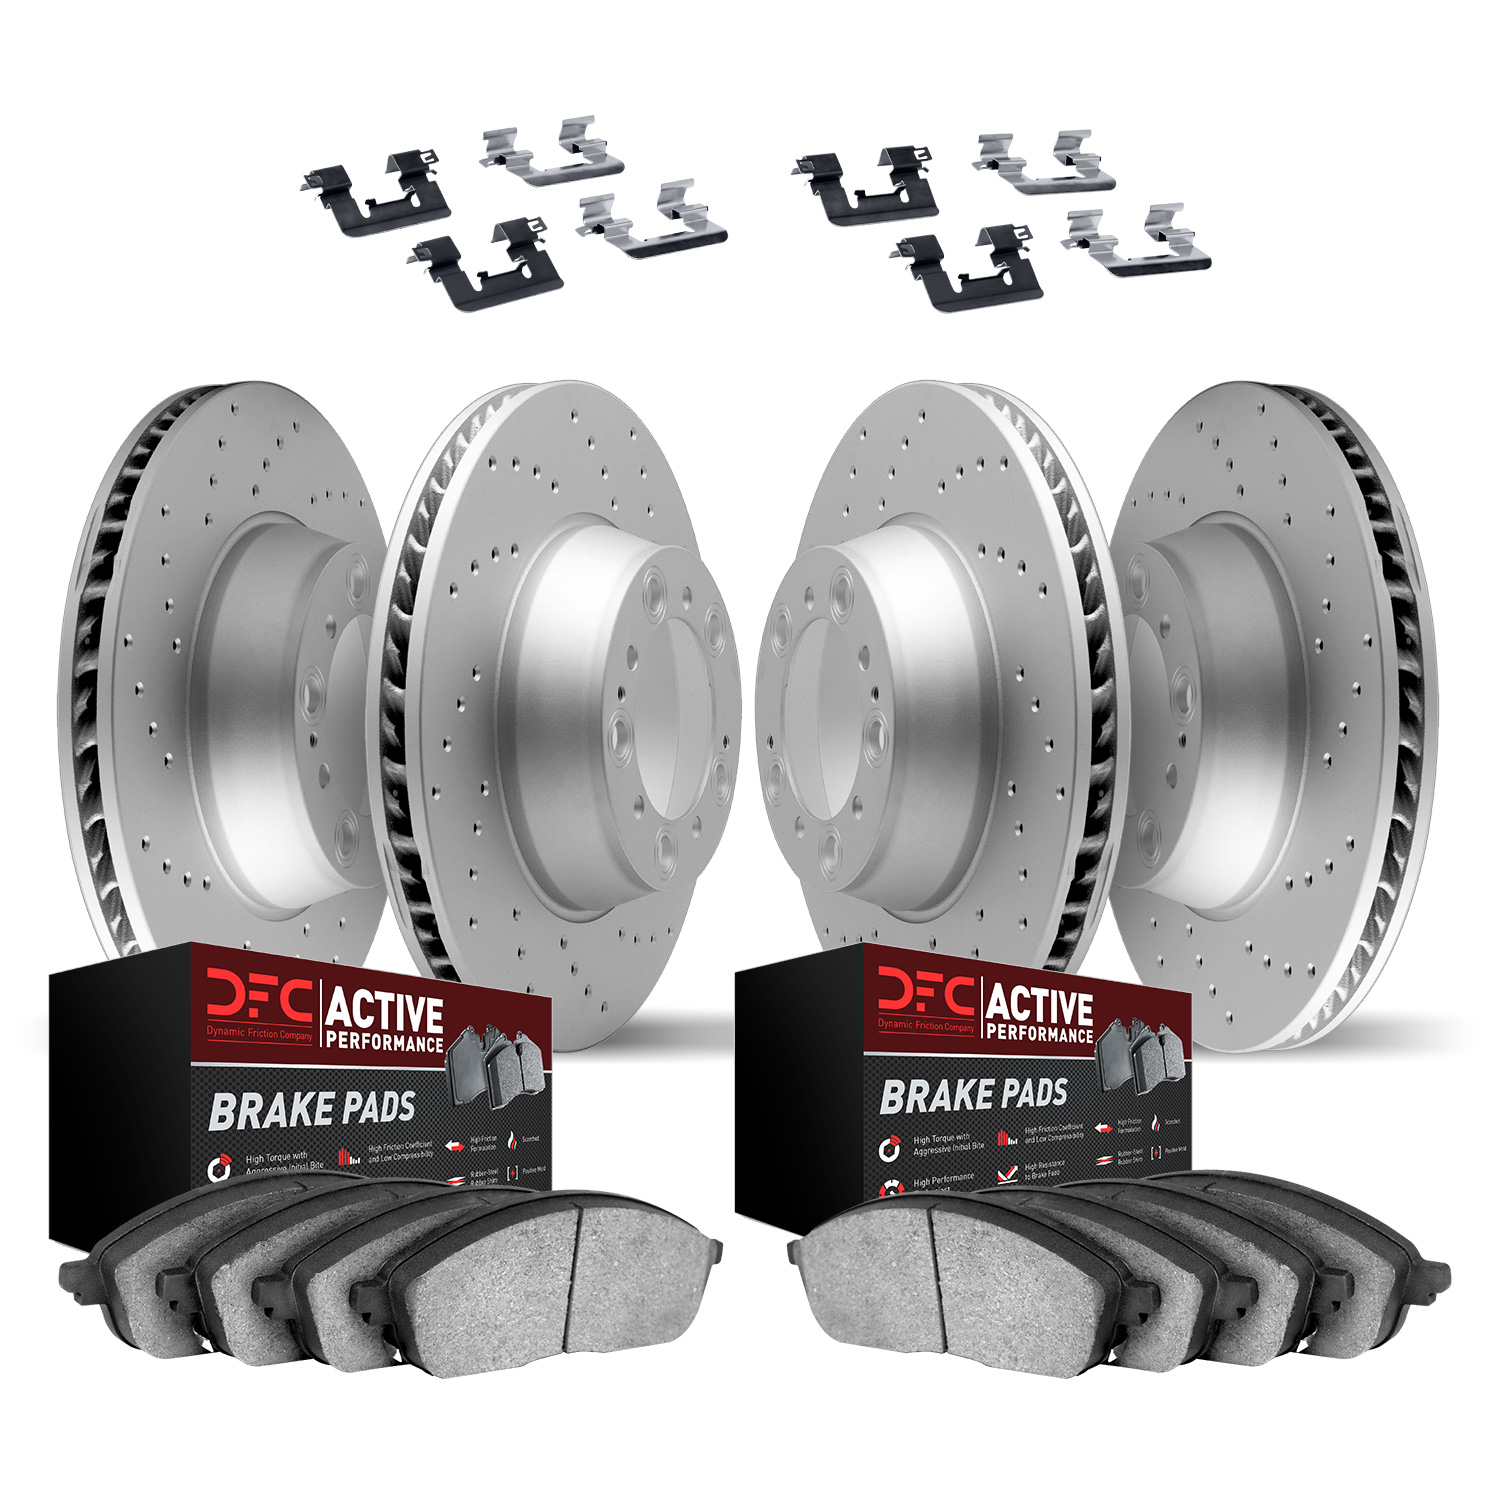 2714-02009 Geoperformance Drilled Brake Rotors with Active Performance Pads Kit & Hardware, 1997-2004 Porsche, Position: Front a